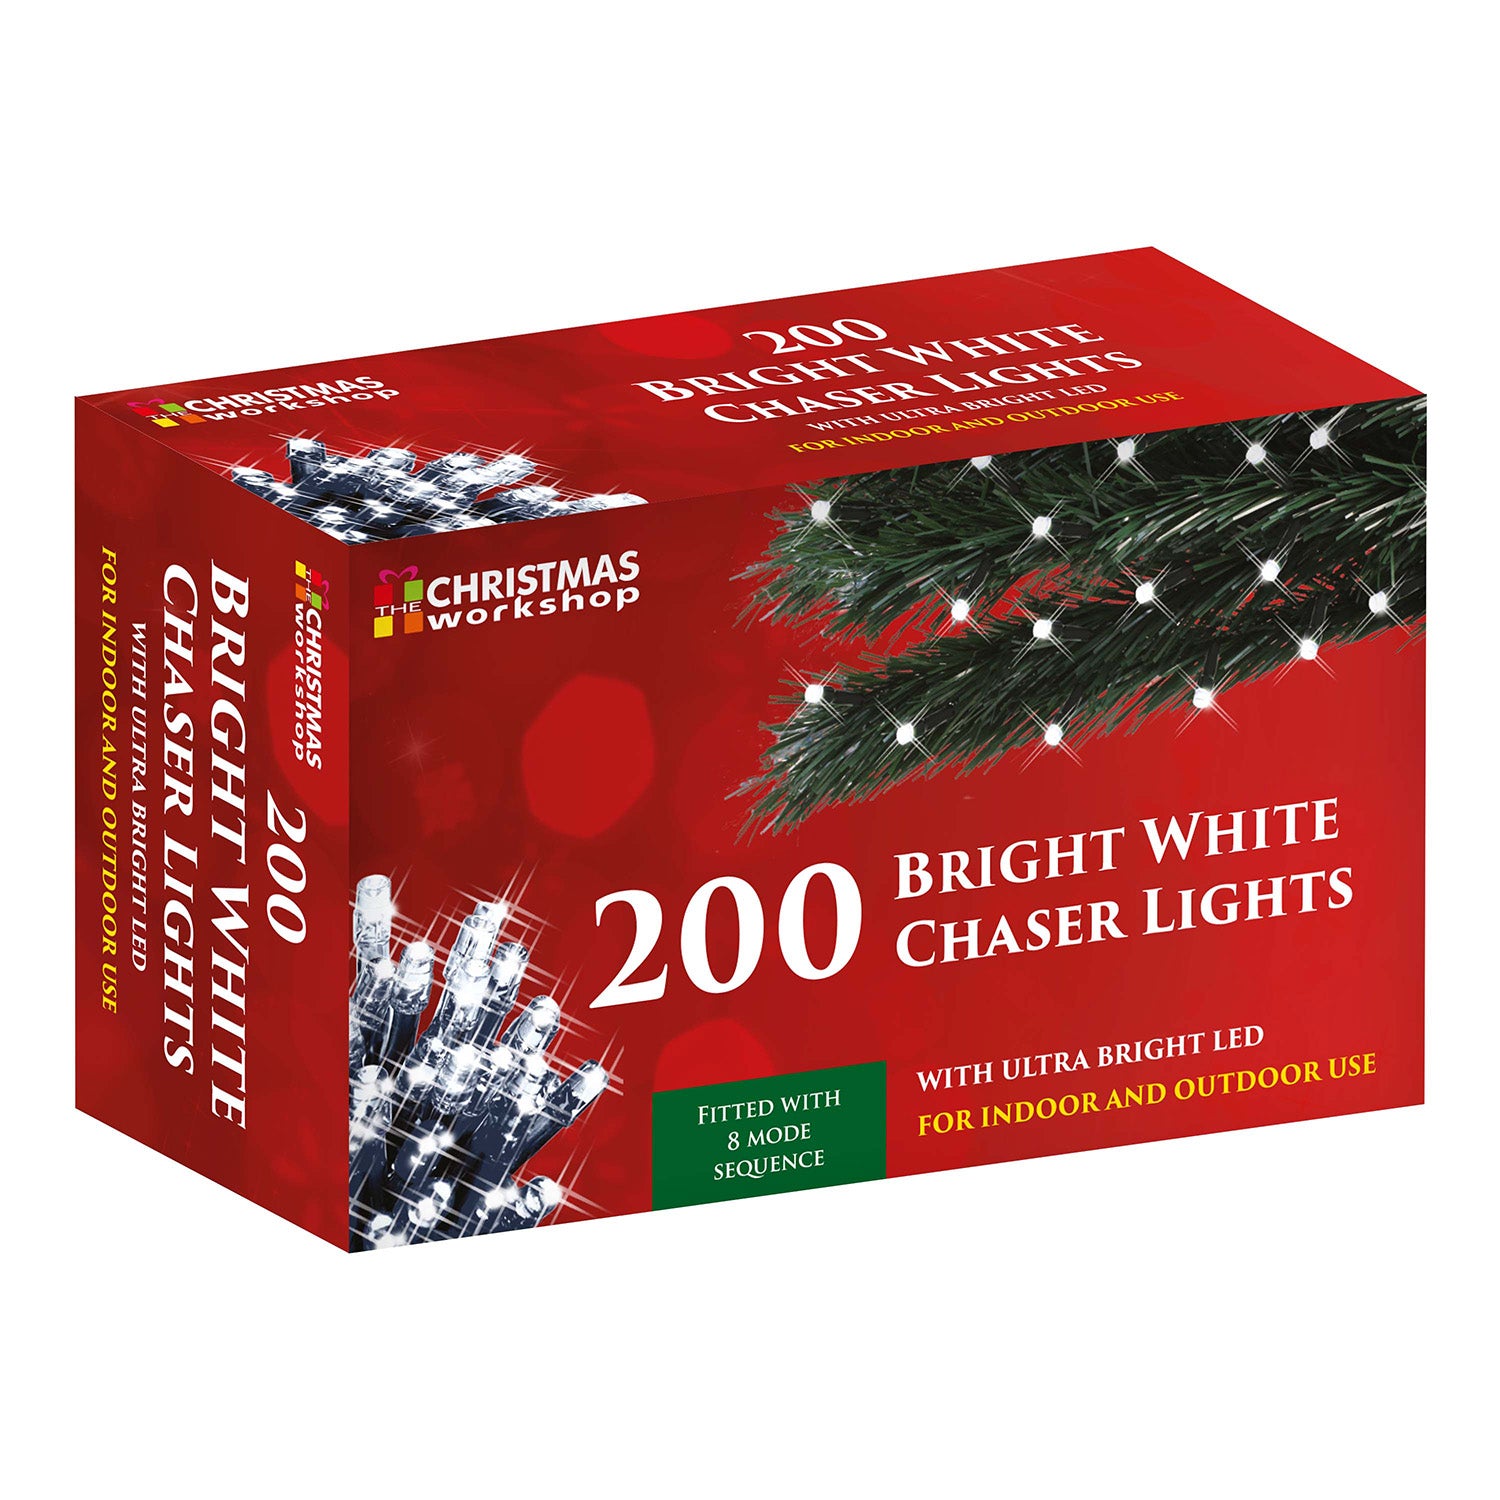 200 Bright White LED Christmas 8 Mode Sequence Chaser Lights